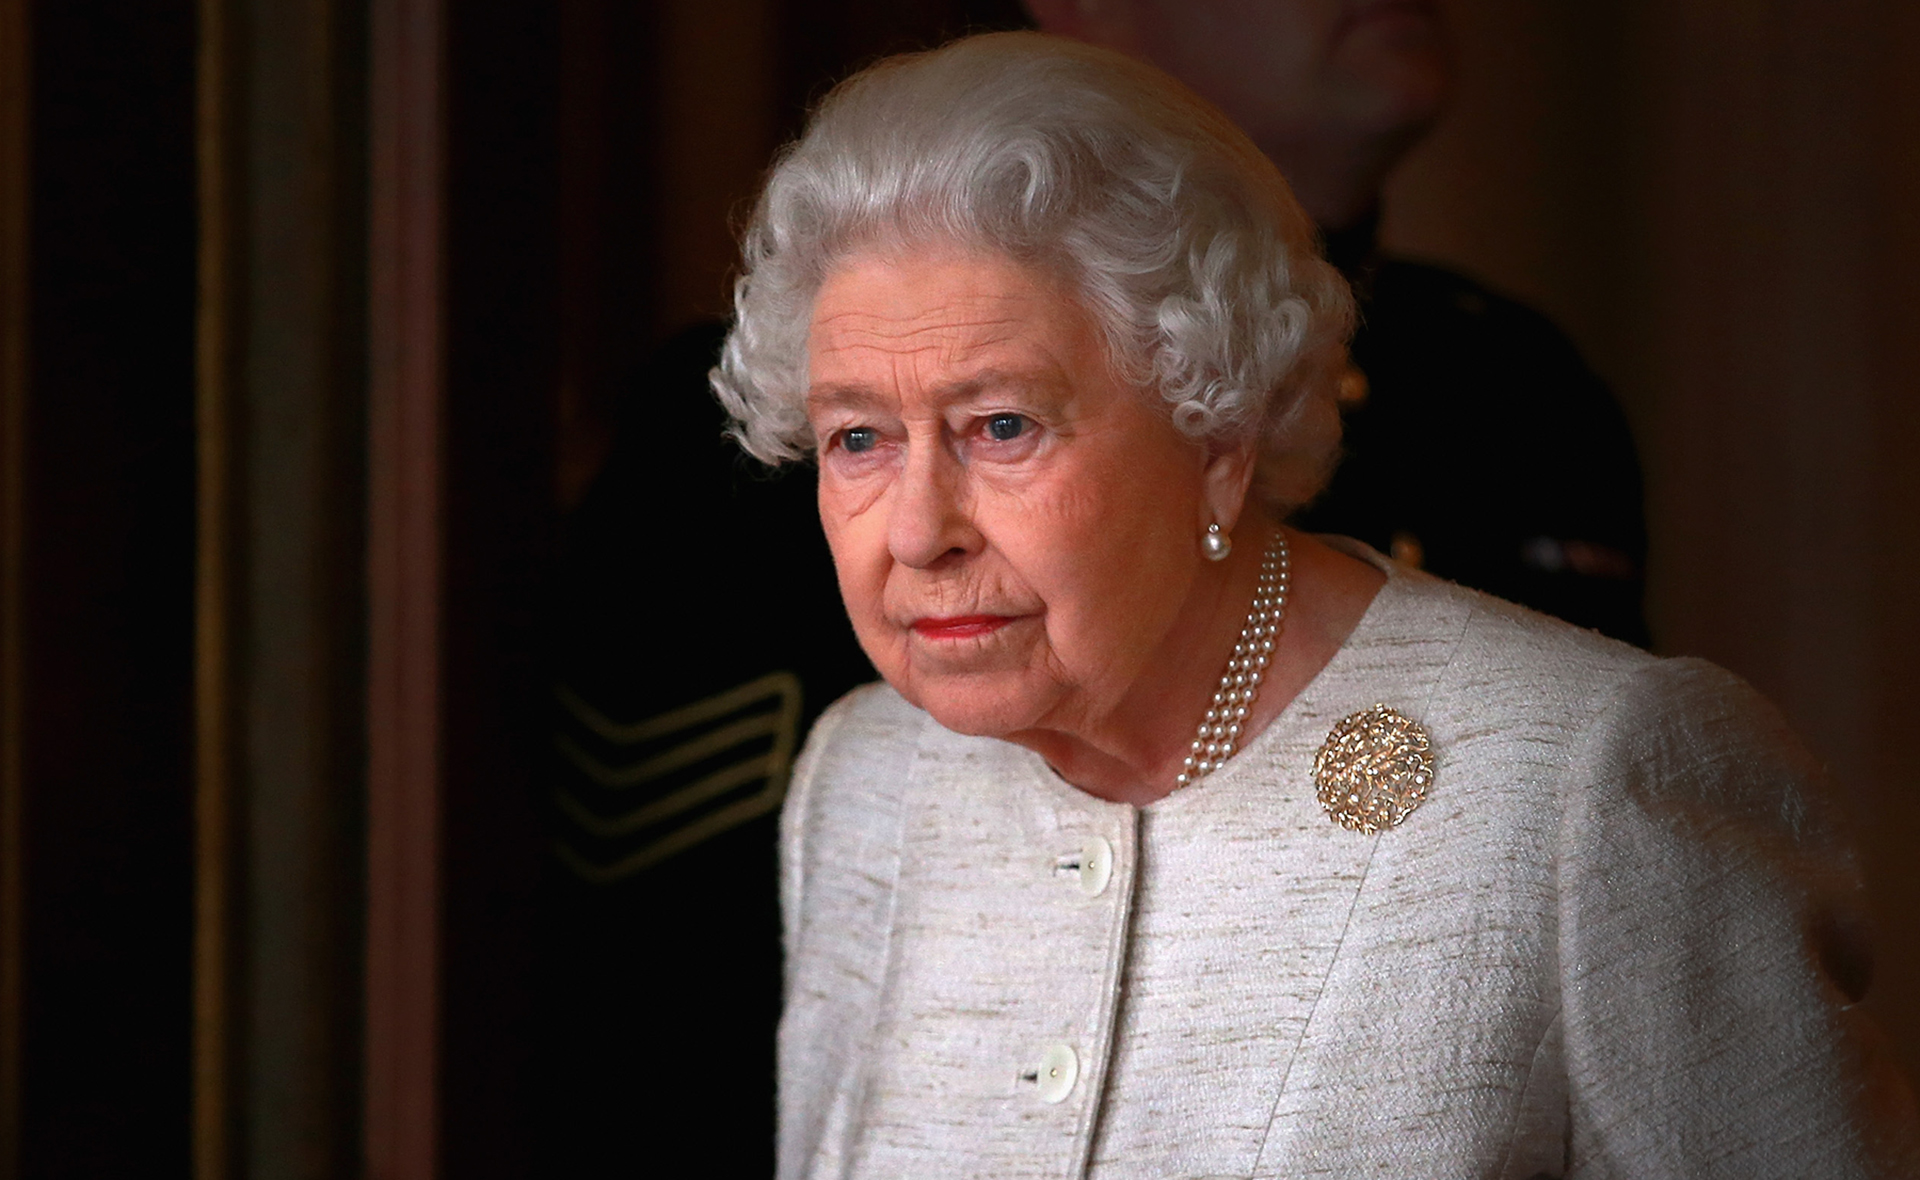 The Queen “regretfully” cancels her appearance at UN climate change summit amid mounting fears for her health